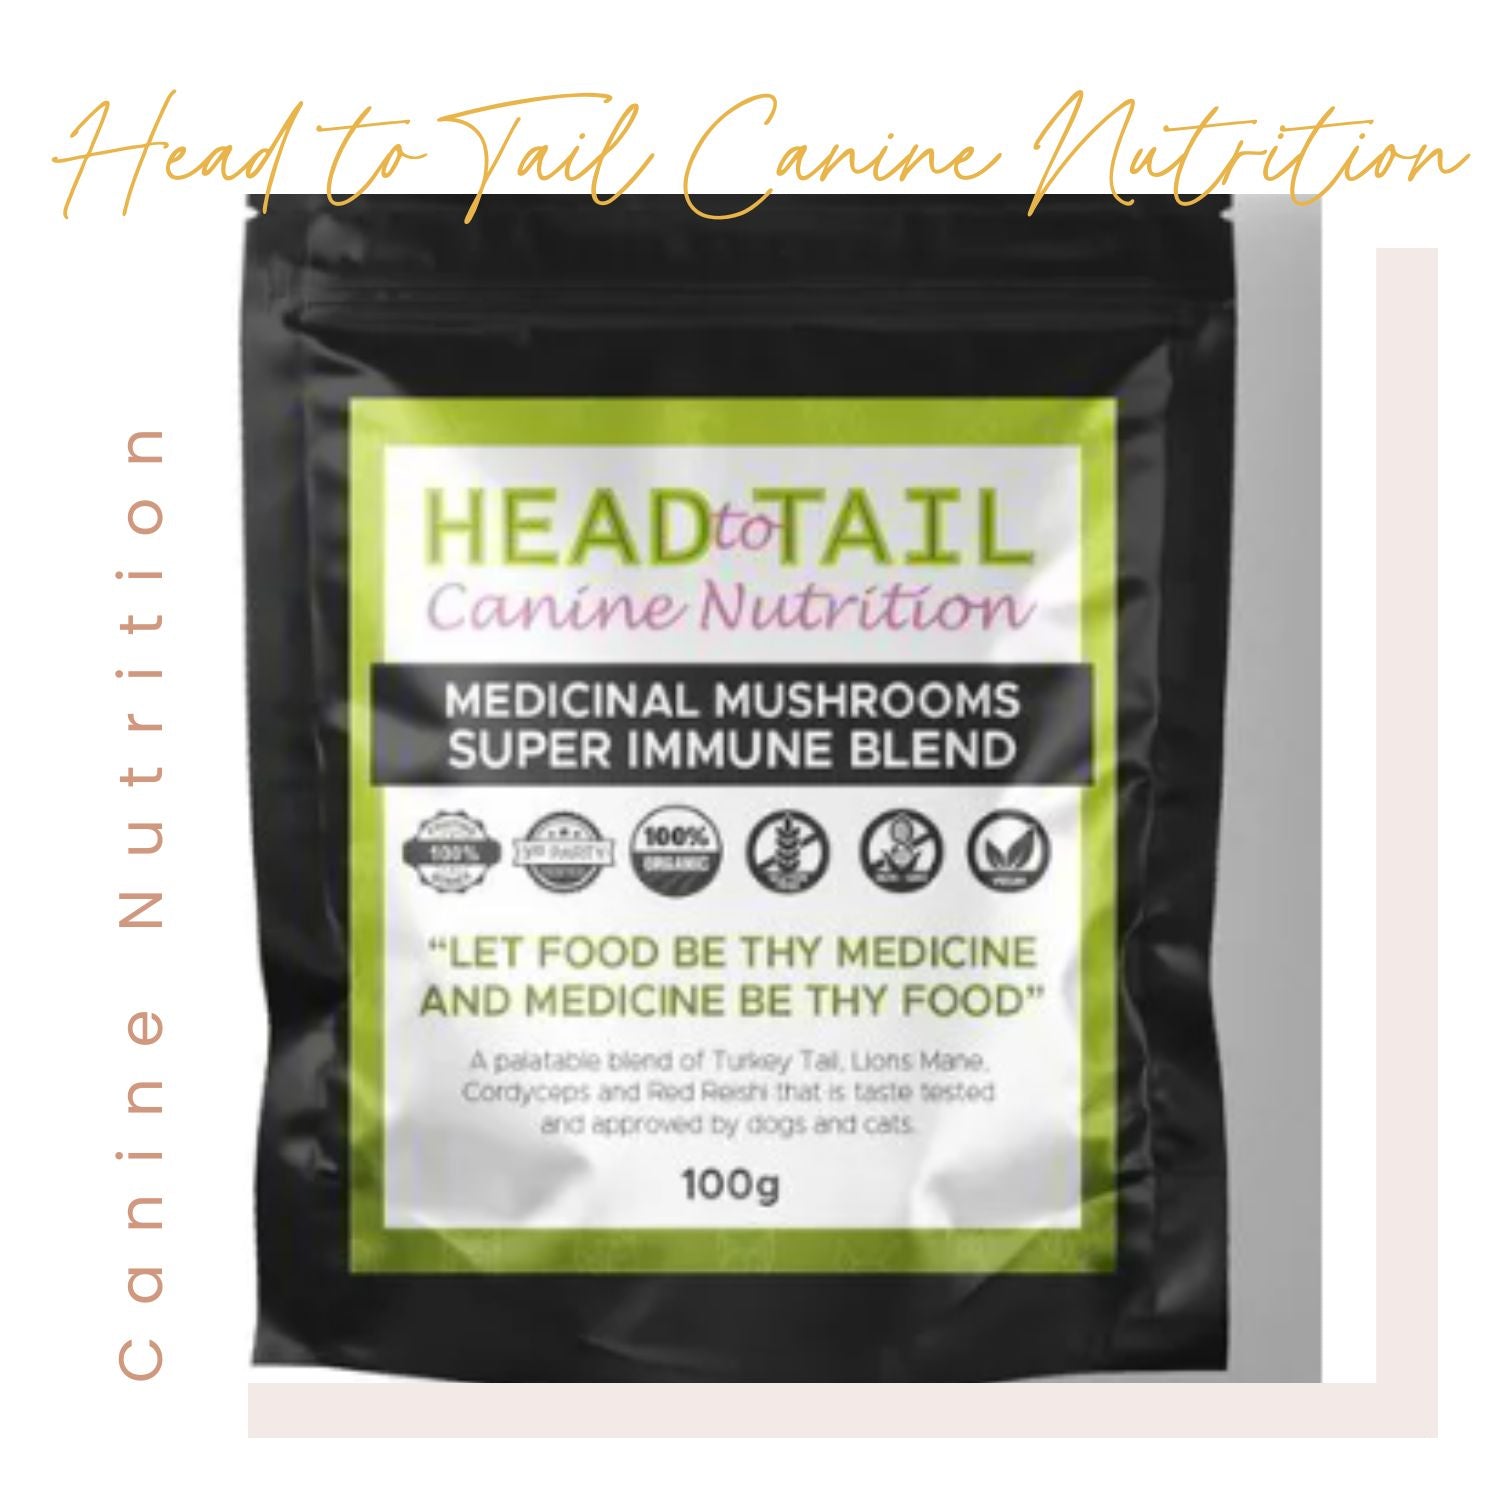 Head to Tail Canine Nutrition